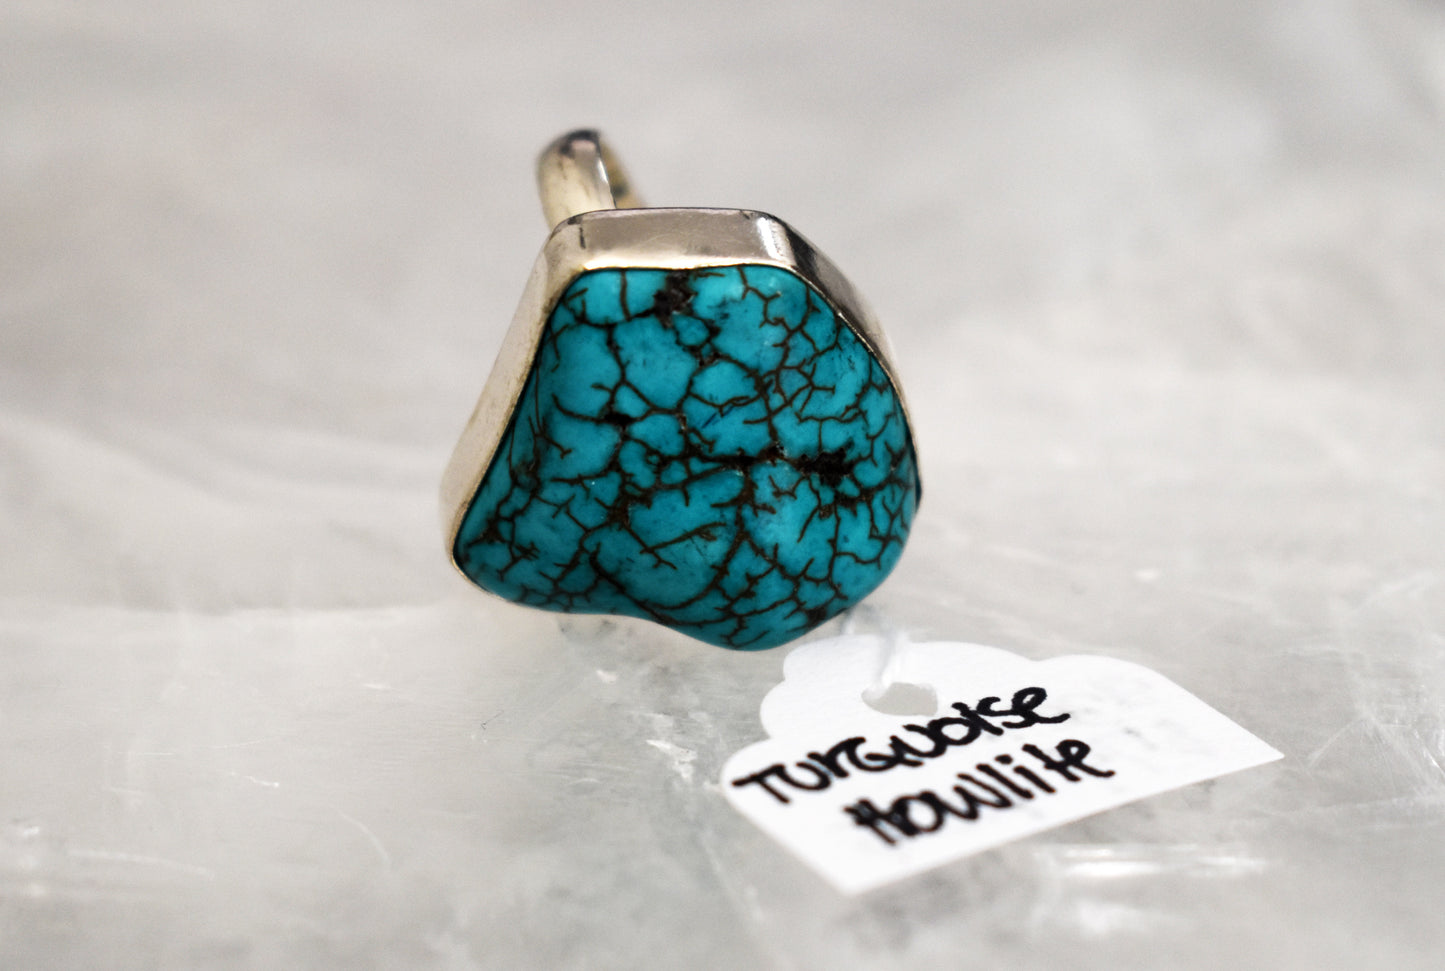 stones-of-transformation - Turquoise Howlite Ring (Size 7.5) - Stones of Transformation - 